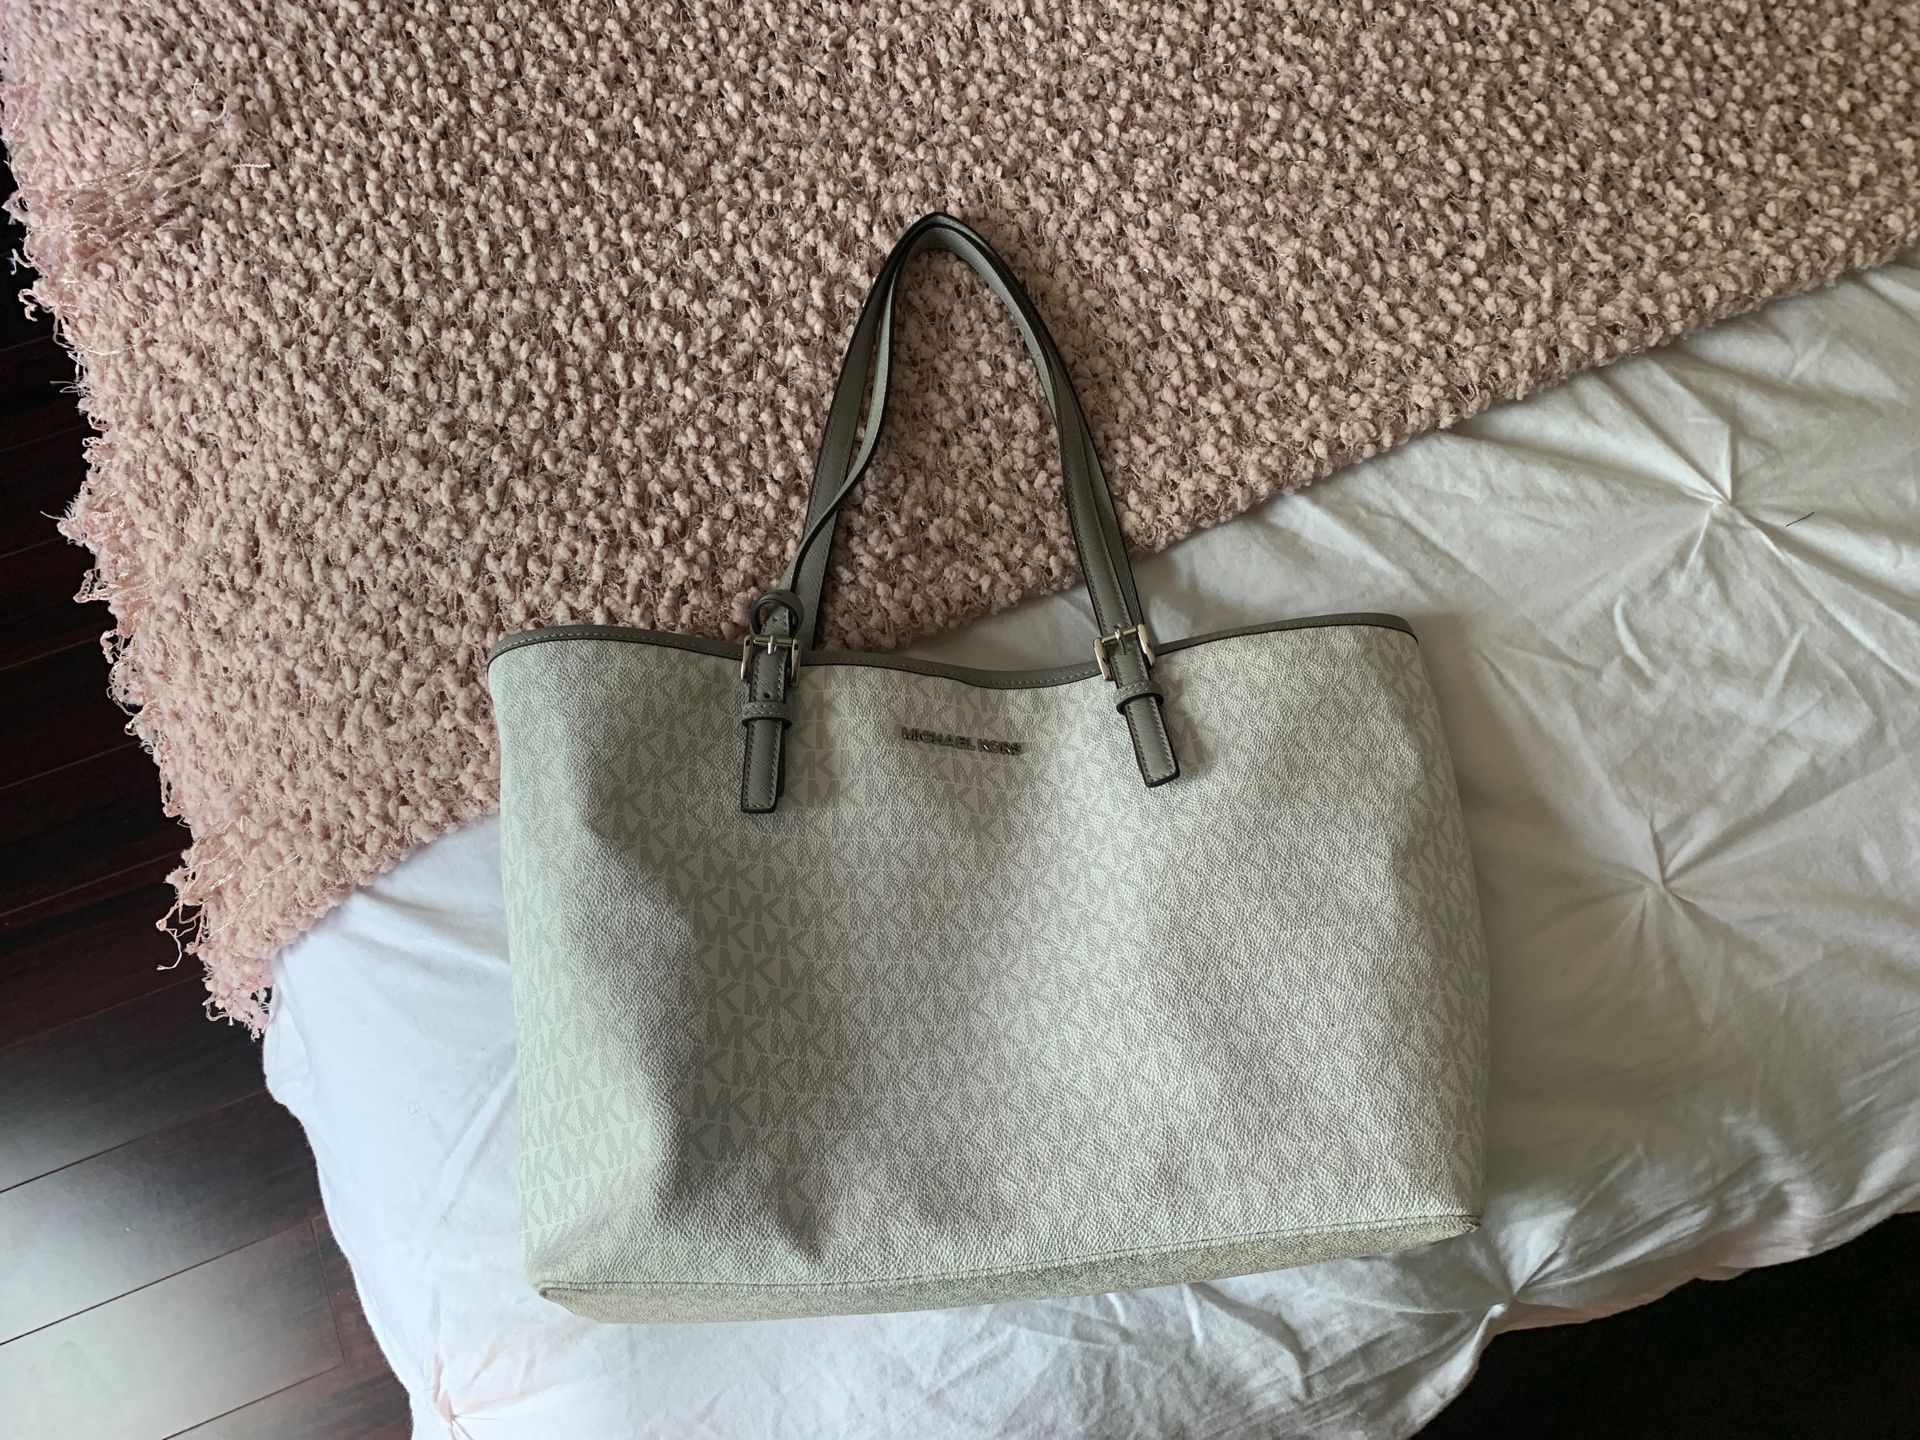 MICHAEL KORS - WHITE WITH SILVER LETTING! Used only 3 times